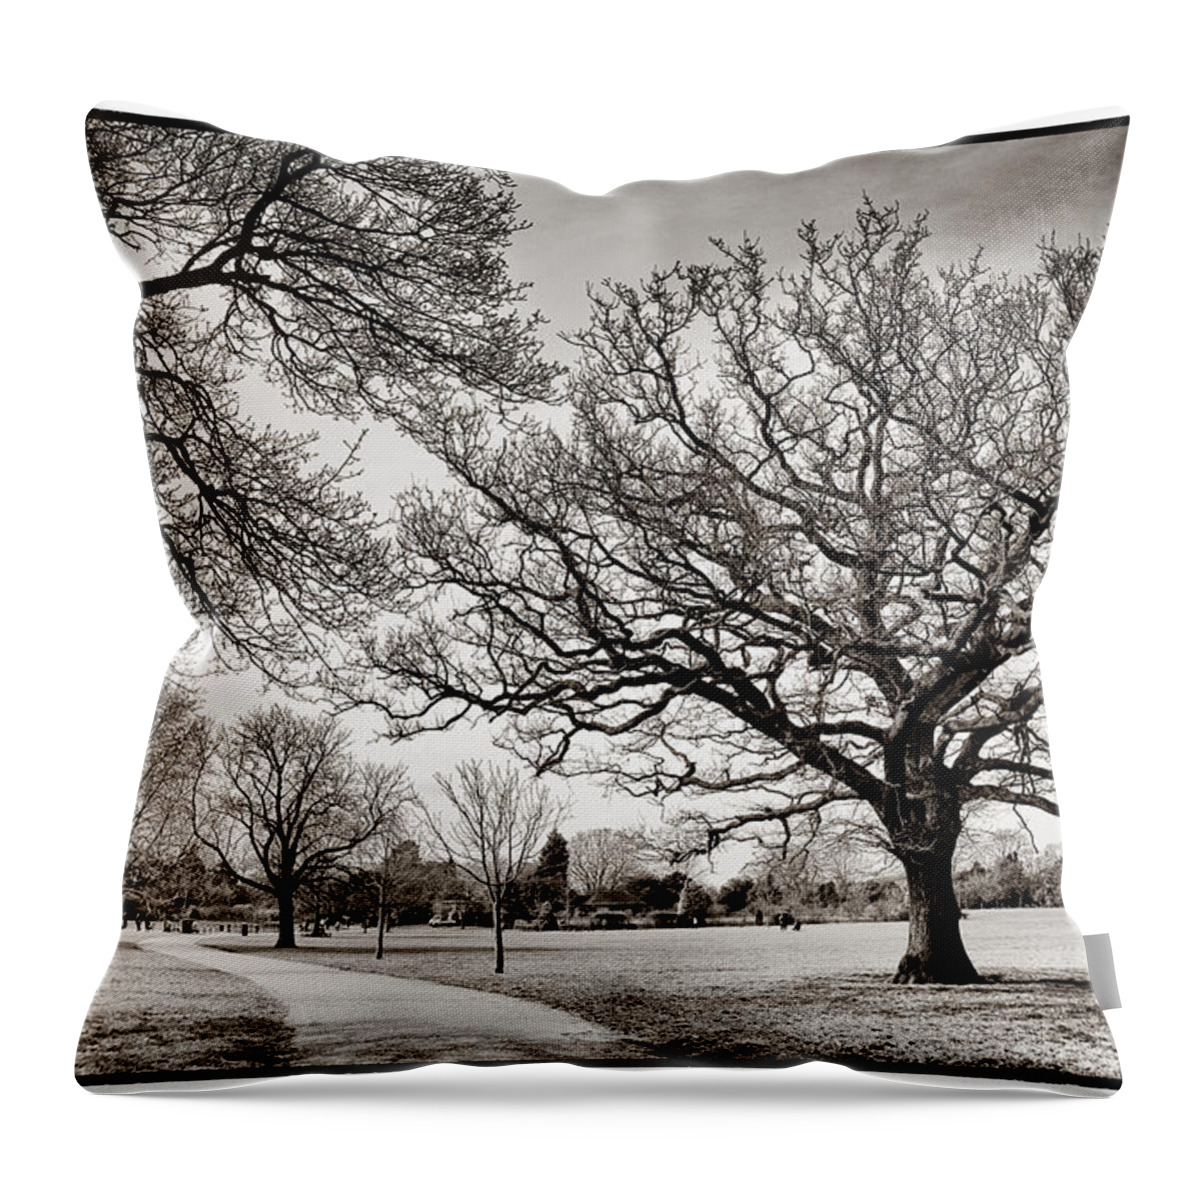 Dulwich Park Throw Pillow featuring the photograph Dulwich Park by Lenny Carter